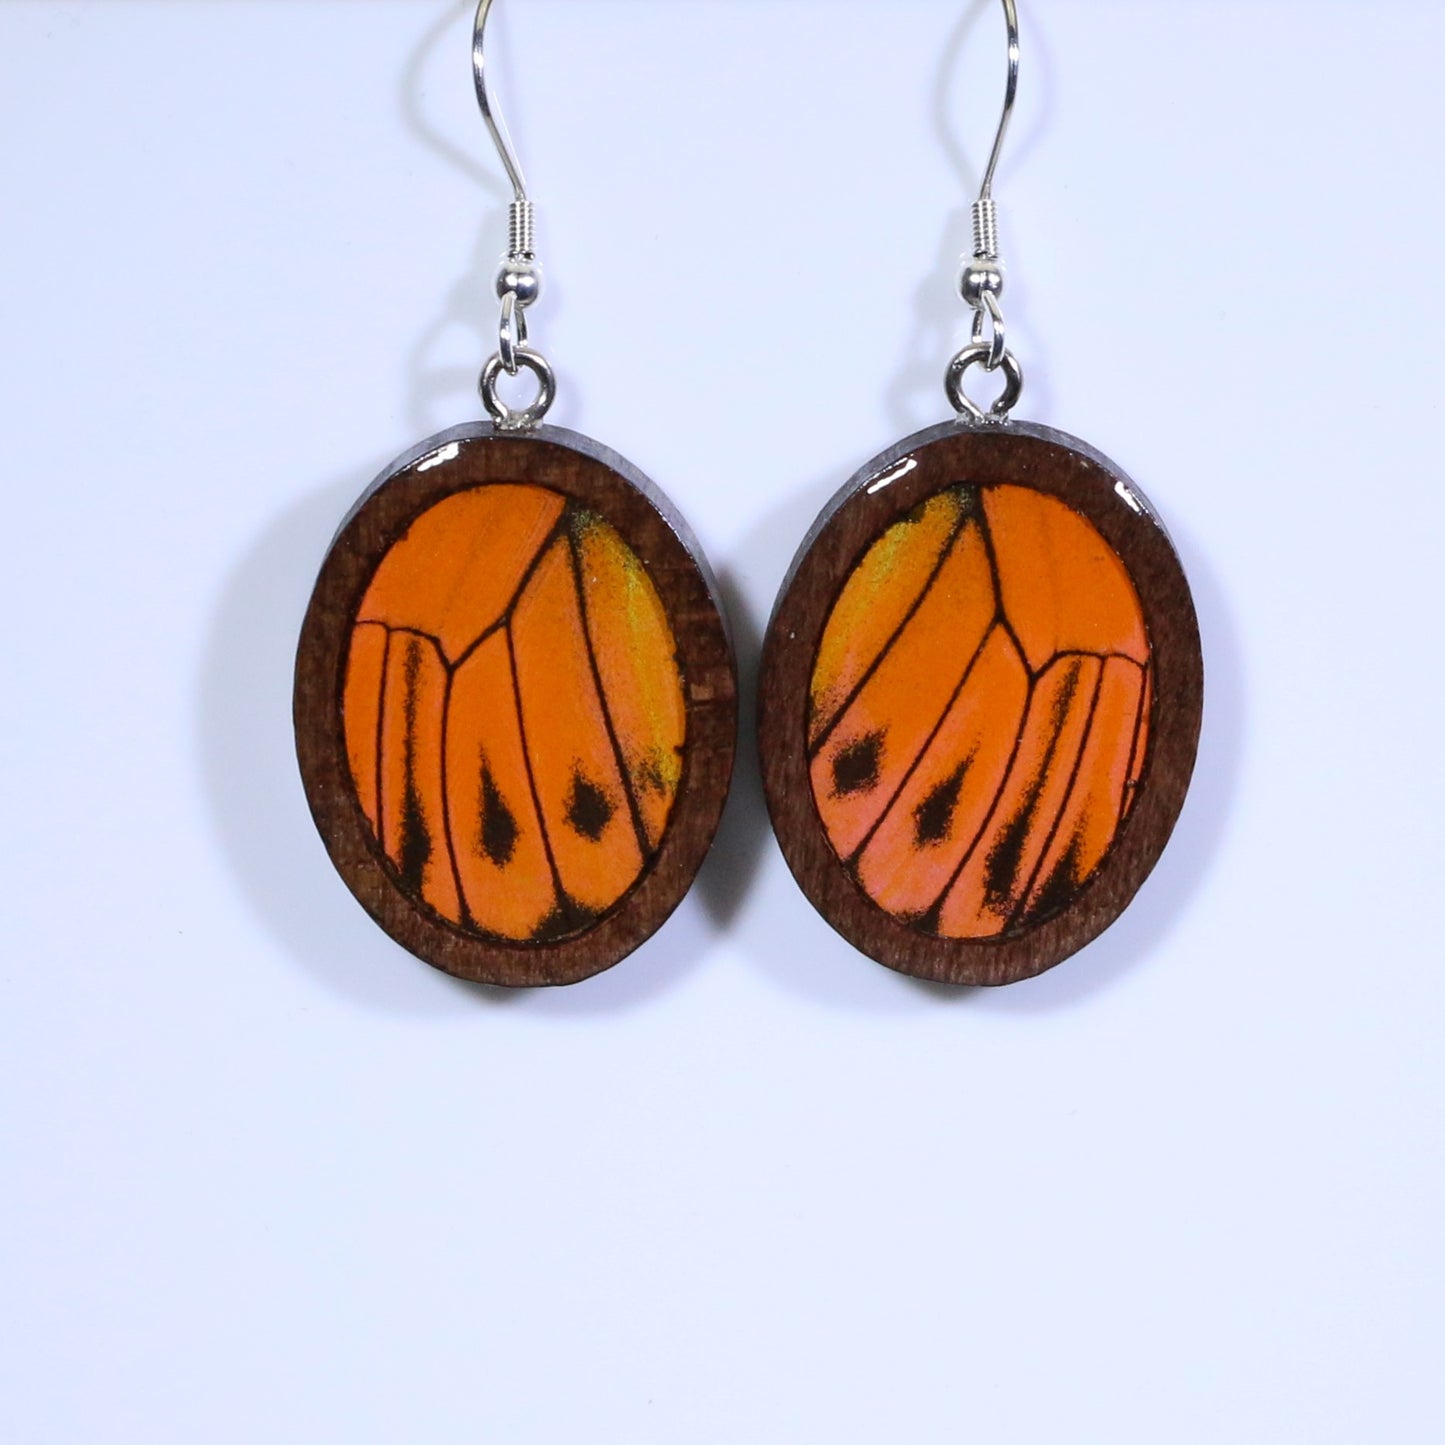 51005 - Real Butterfly Wing Jewelry - Earring Collection - Vibrant Sulphur - Orange